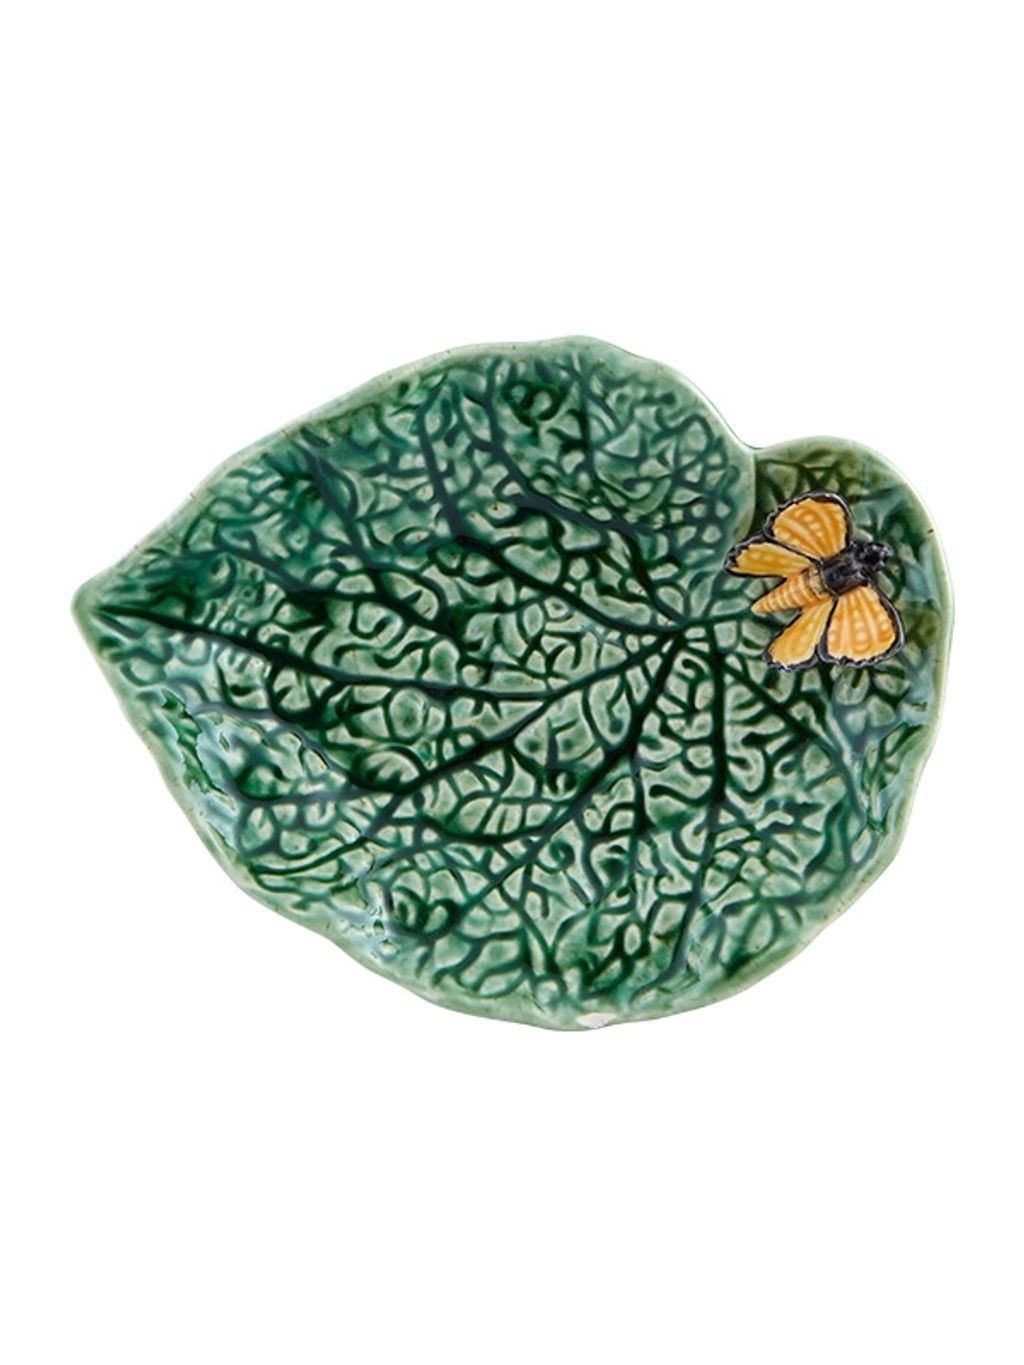 Bordallo Pinheiro Countryside Leaves - Begonia Leaf with Butterfly 20cm